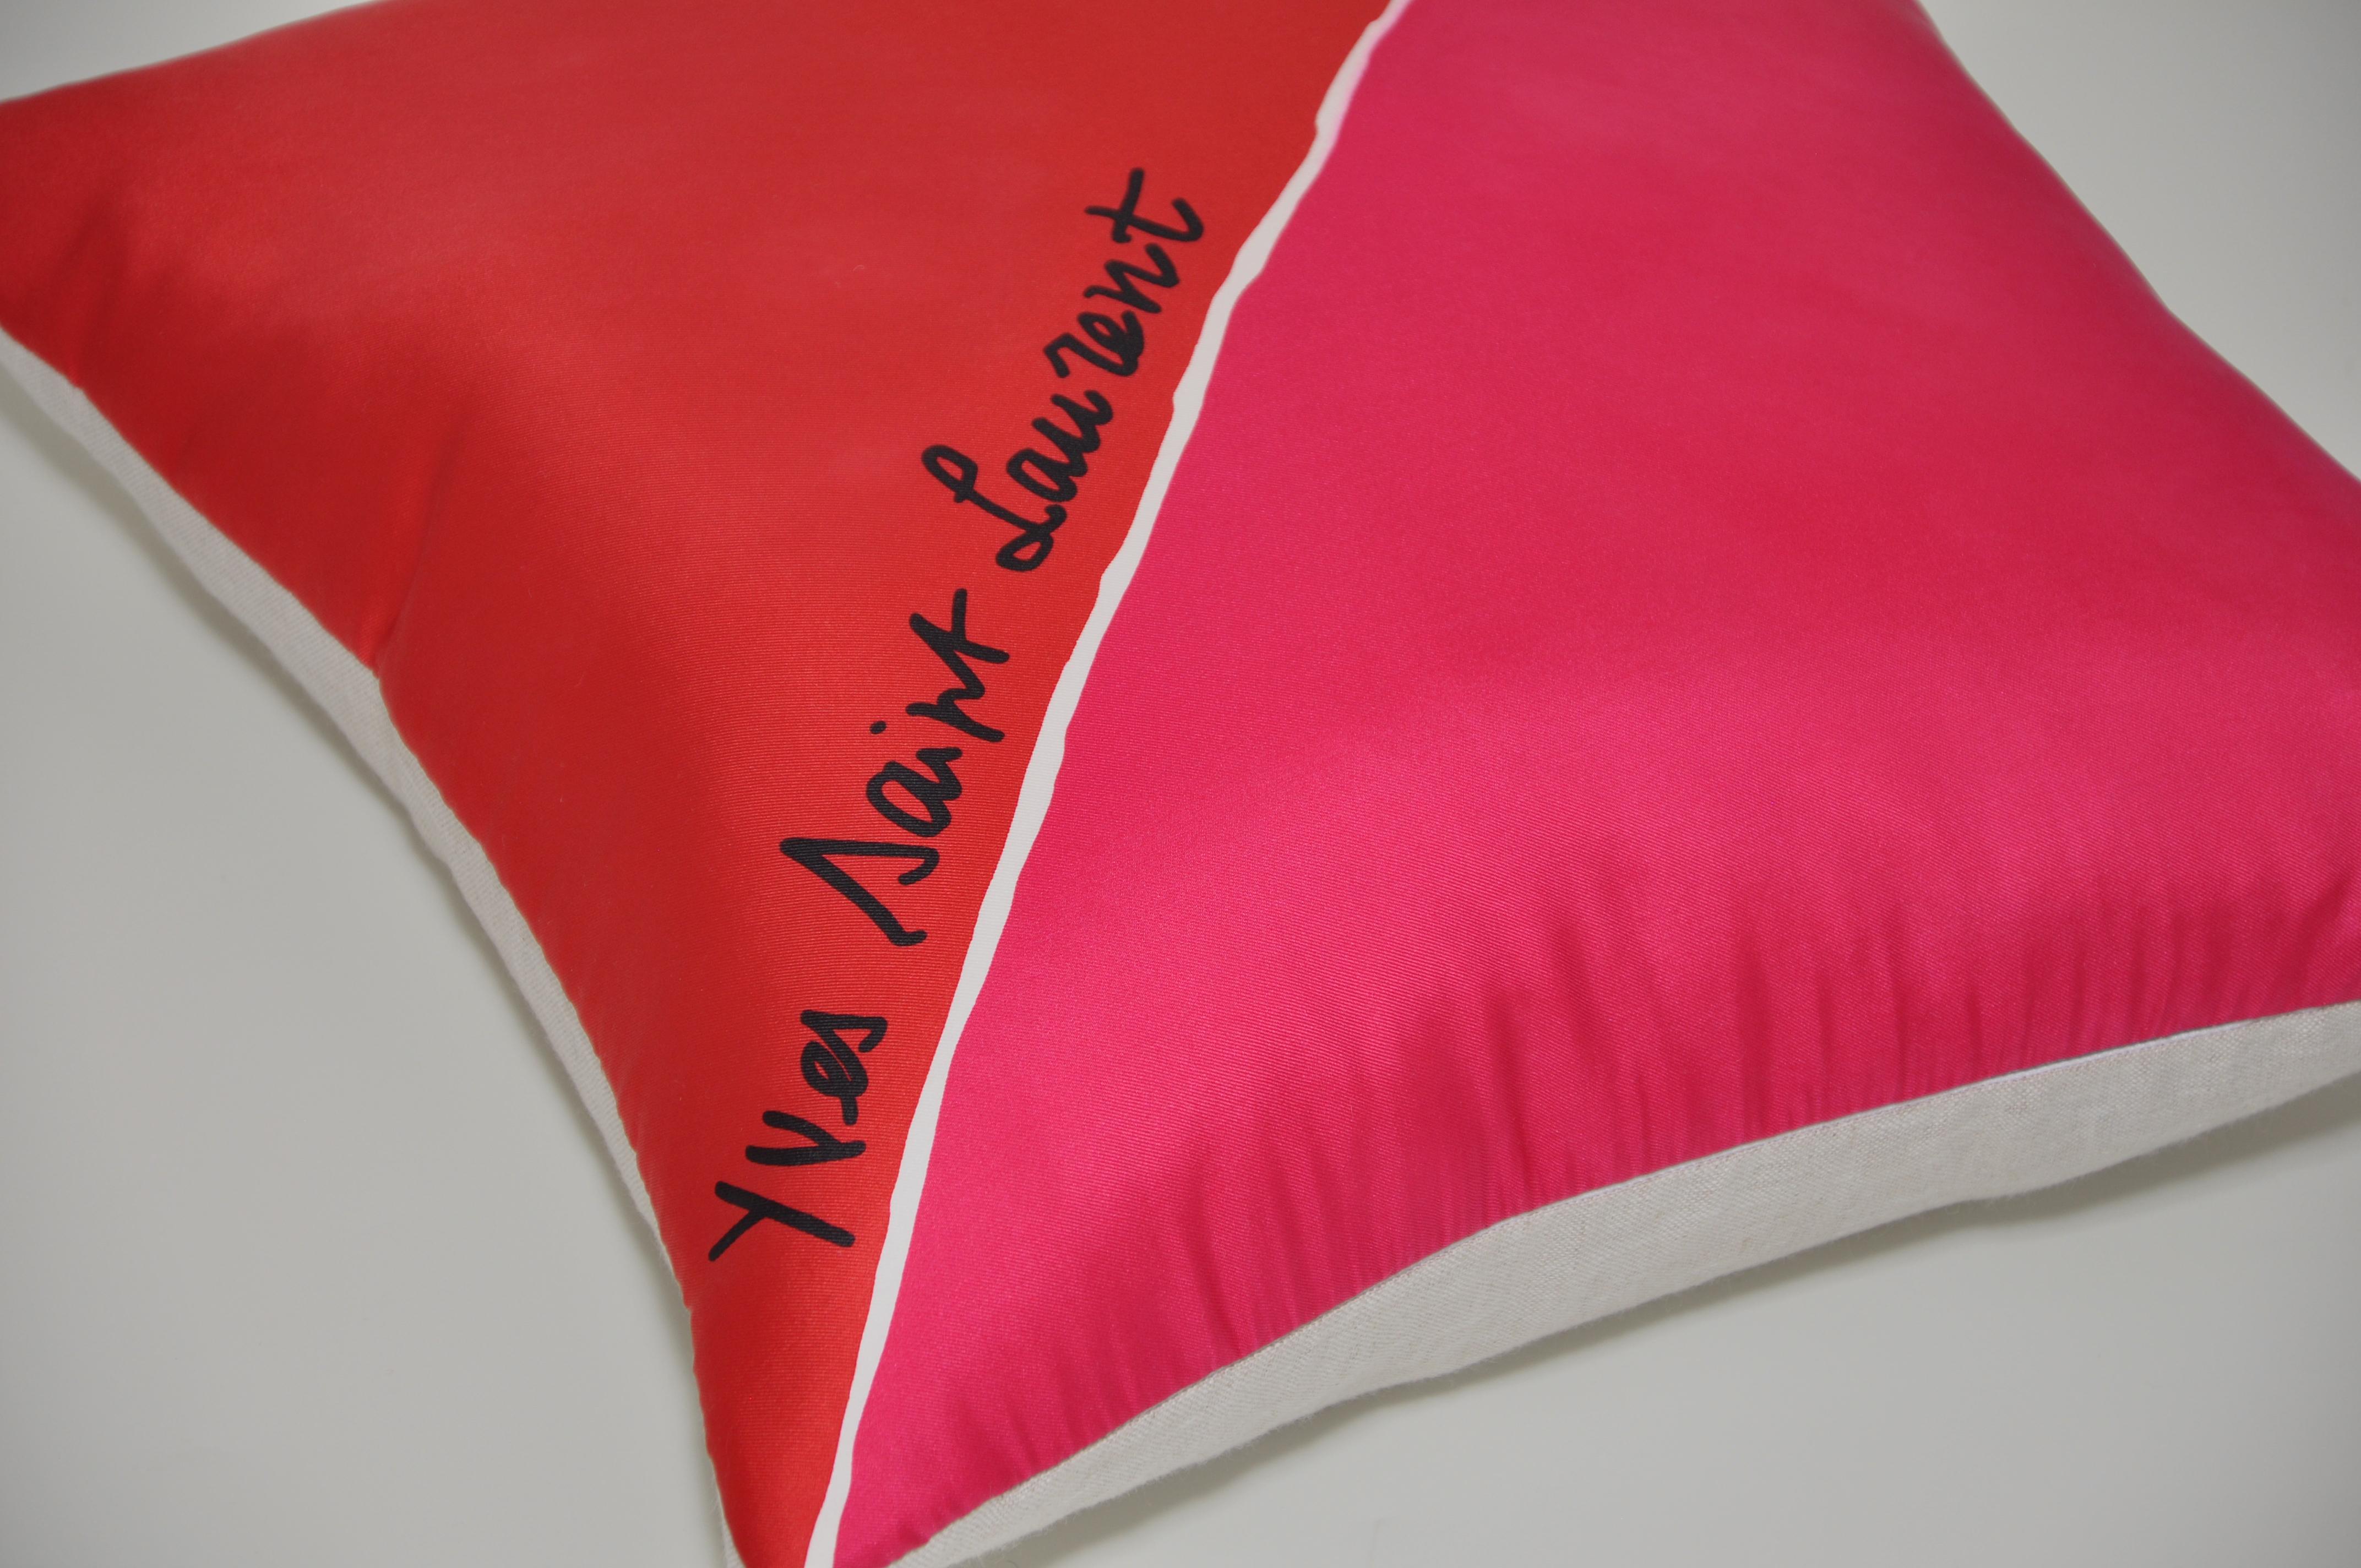 Vintage Christmas red pink YSL fabric cushion with Irish linen pillow

This cushion is a one-of-a-kind and part of a sustainability project. 
It has been created from an up-cycled, recycled luxury fabric, used with the intentions of promoting a